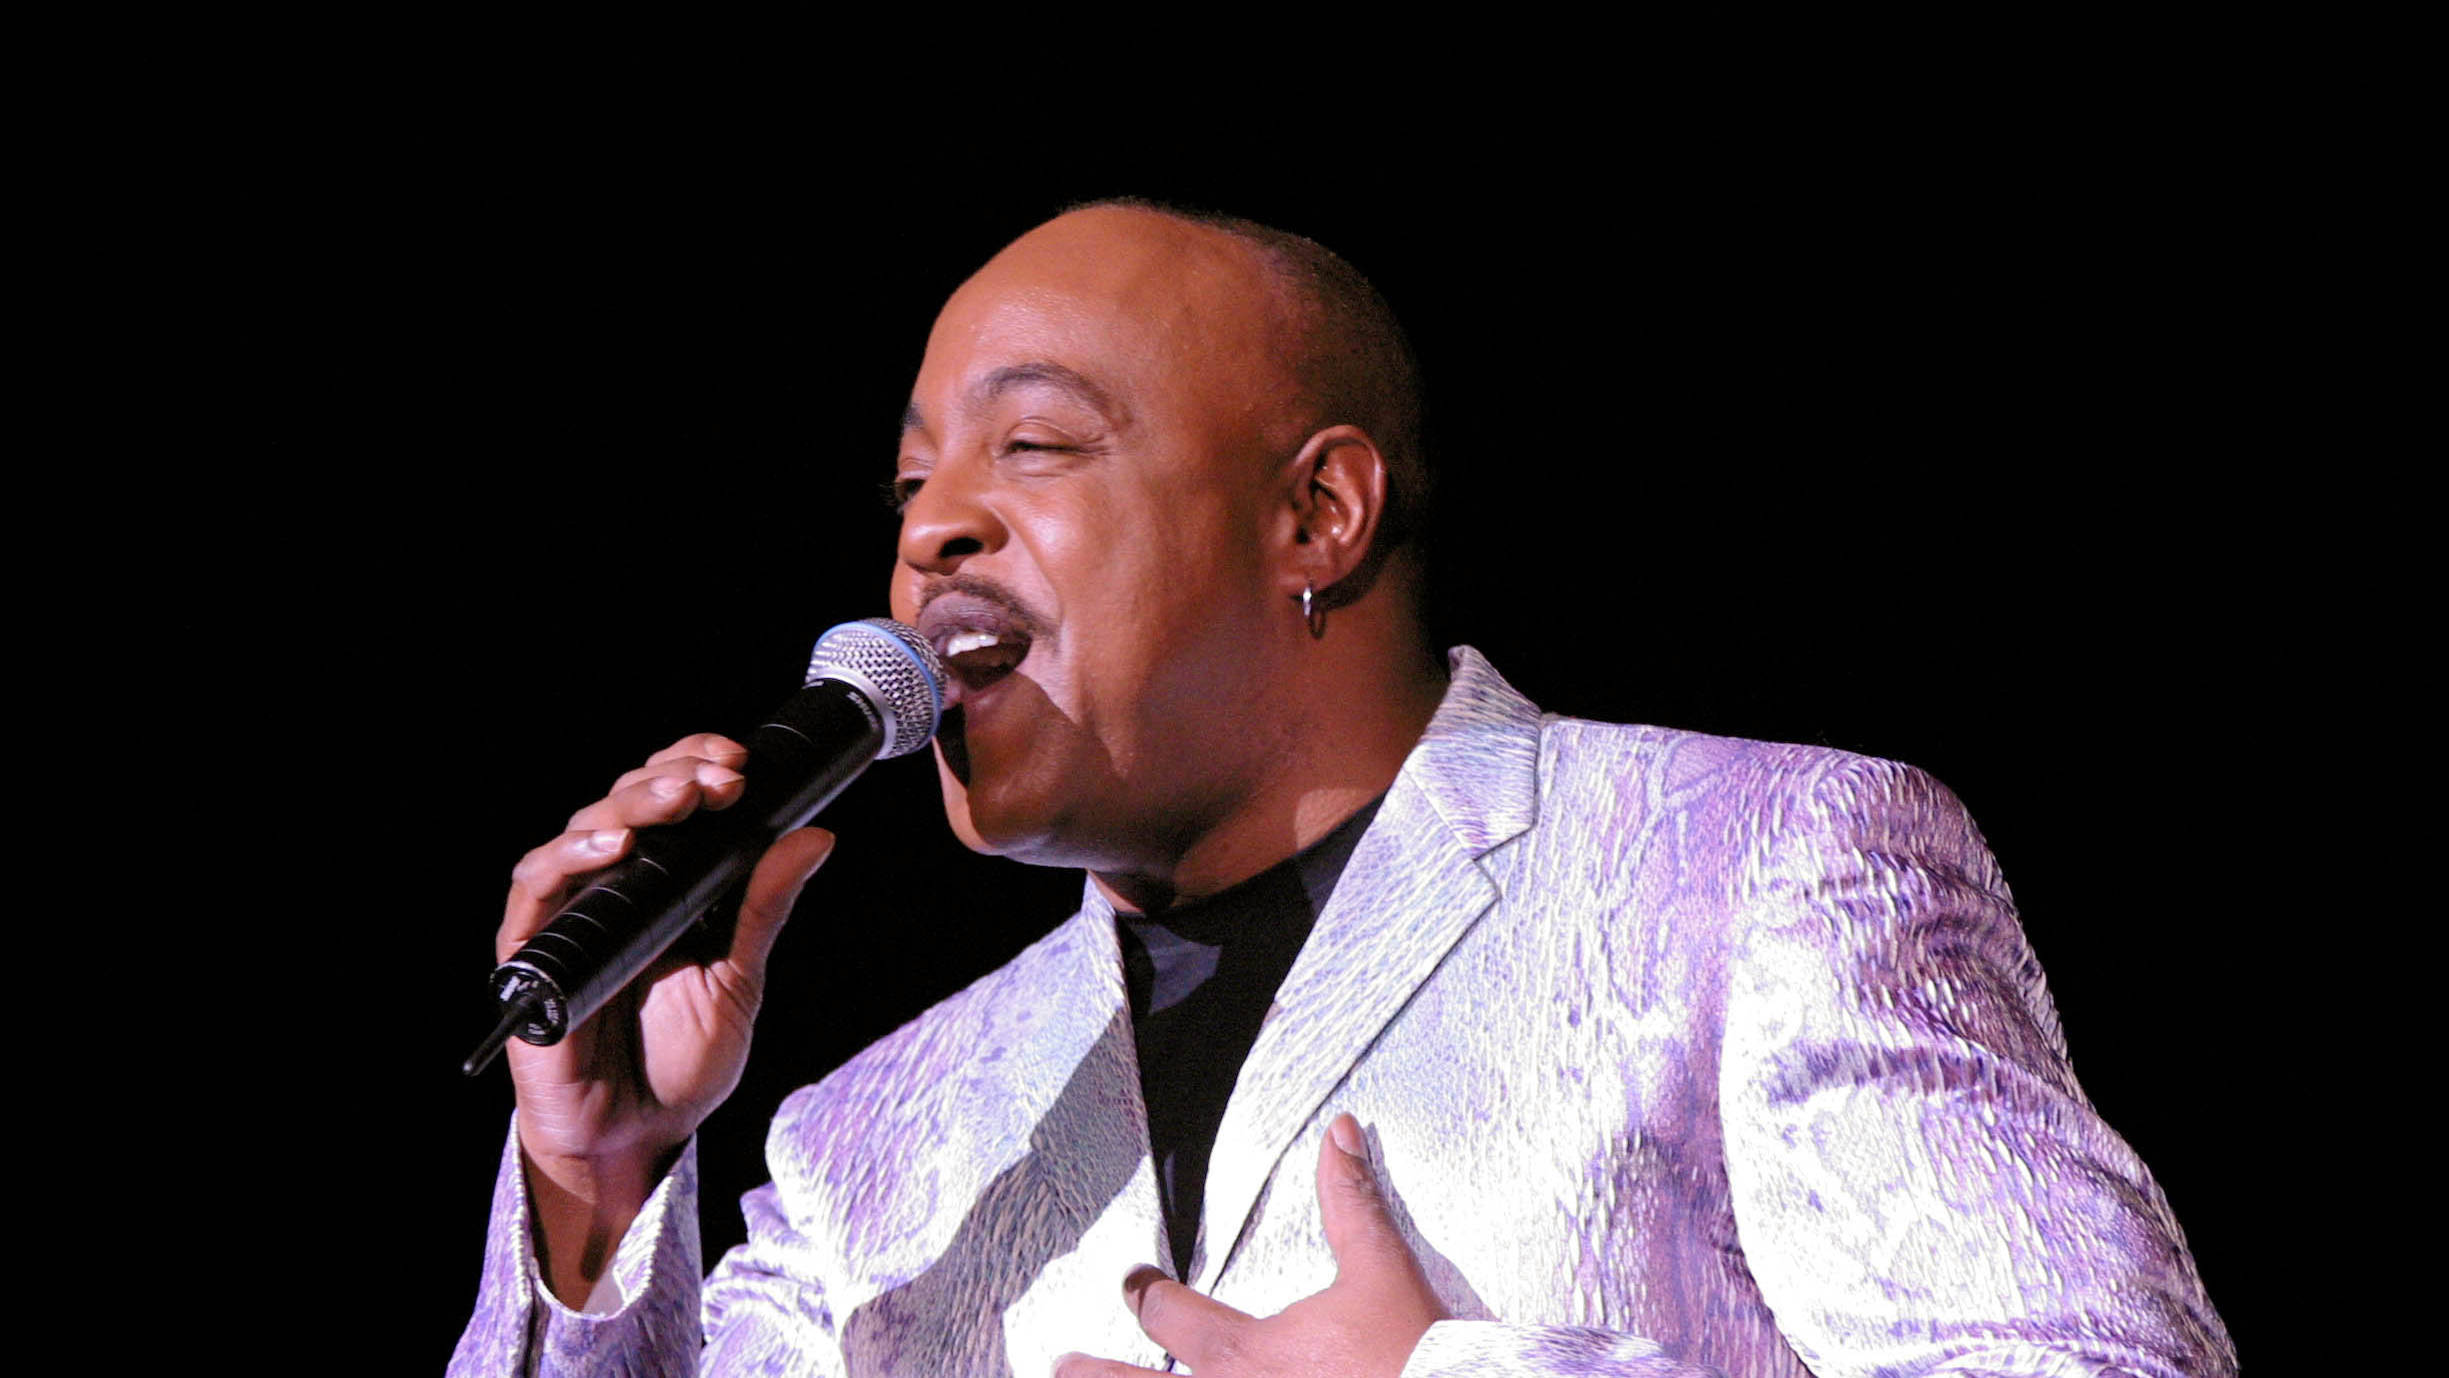 Peabo Bryson A Whole New World Singer Is In Hospital After Heart Attack Smooth